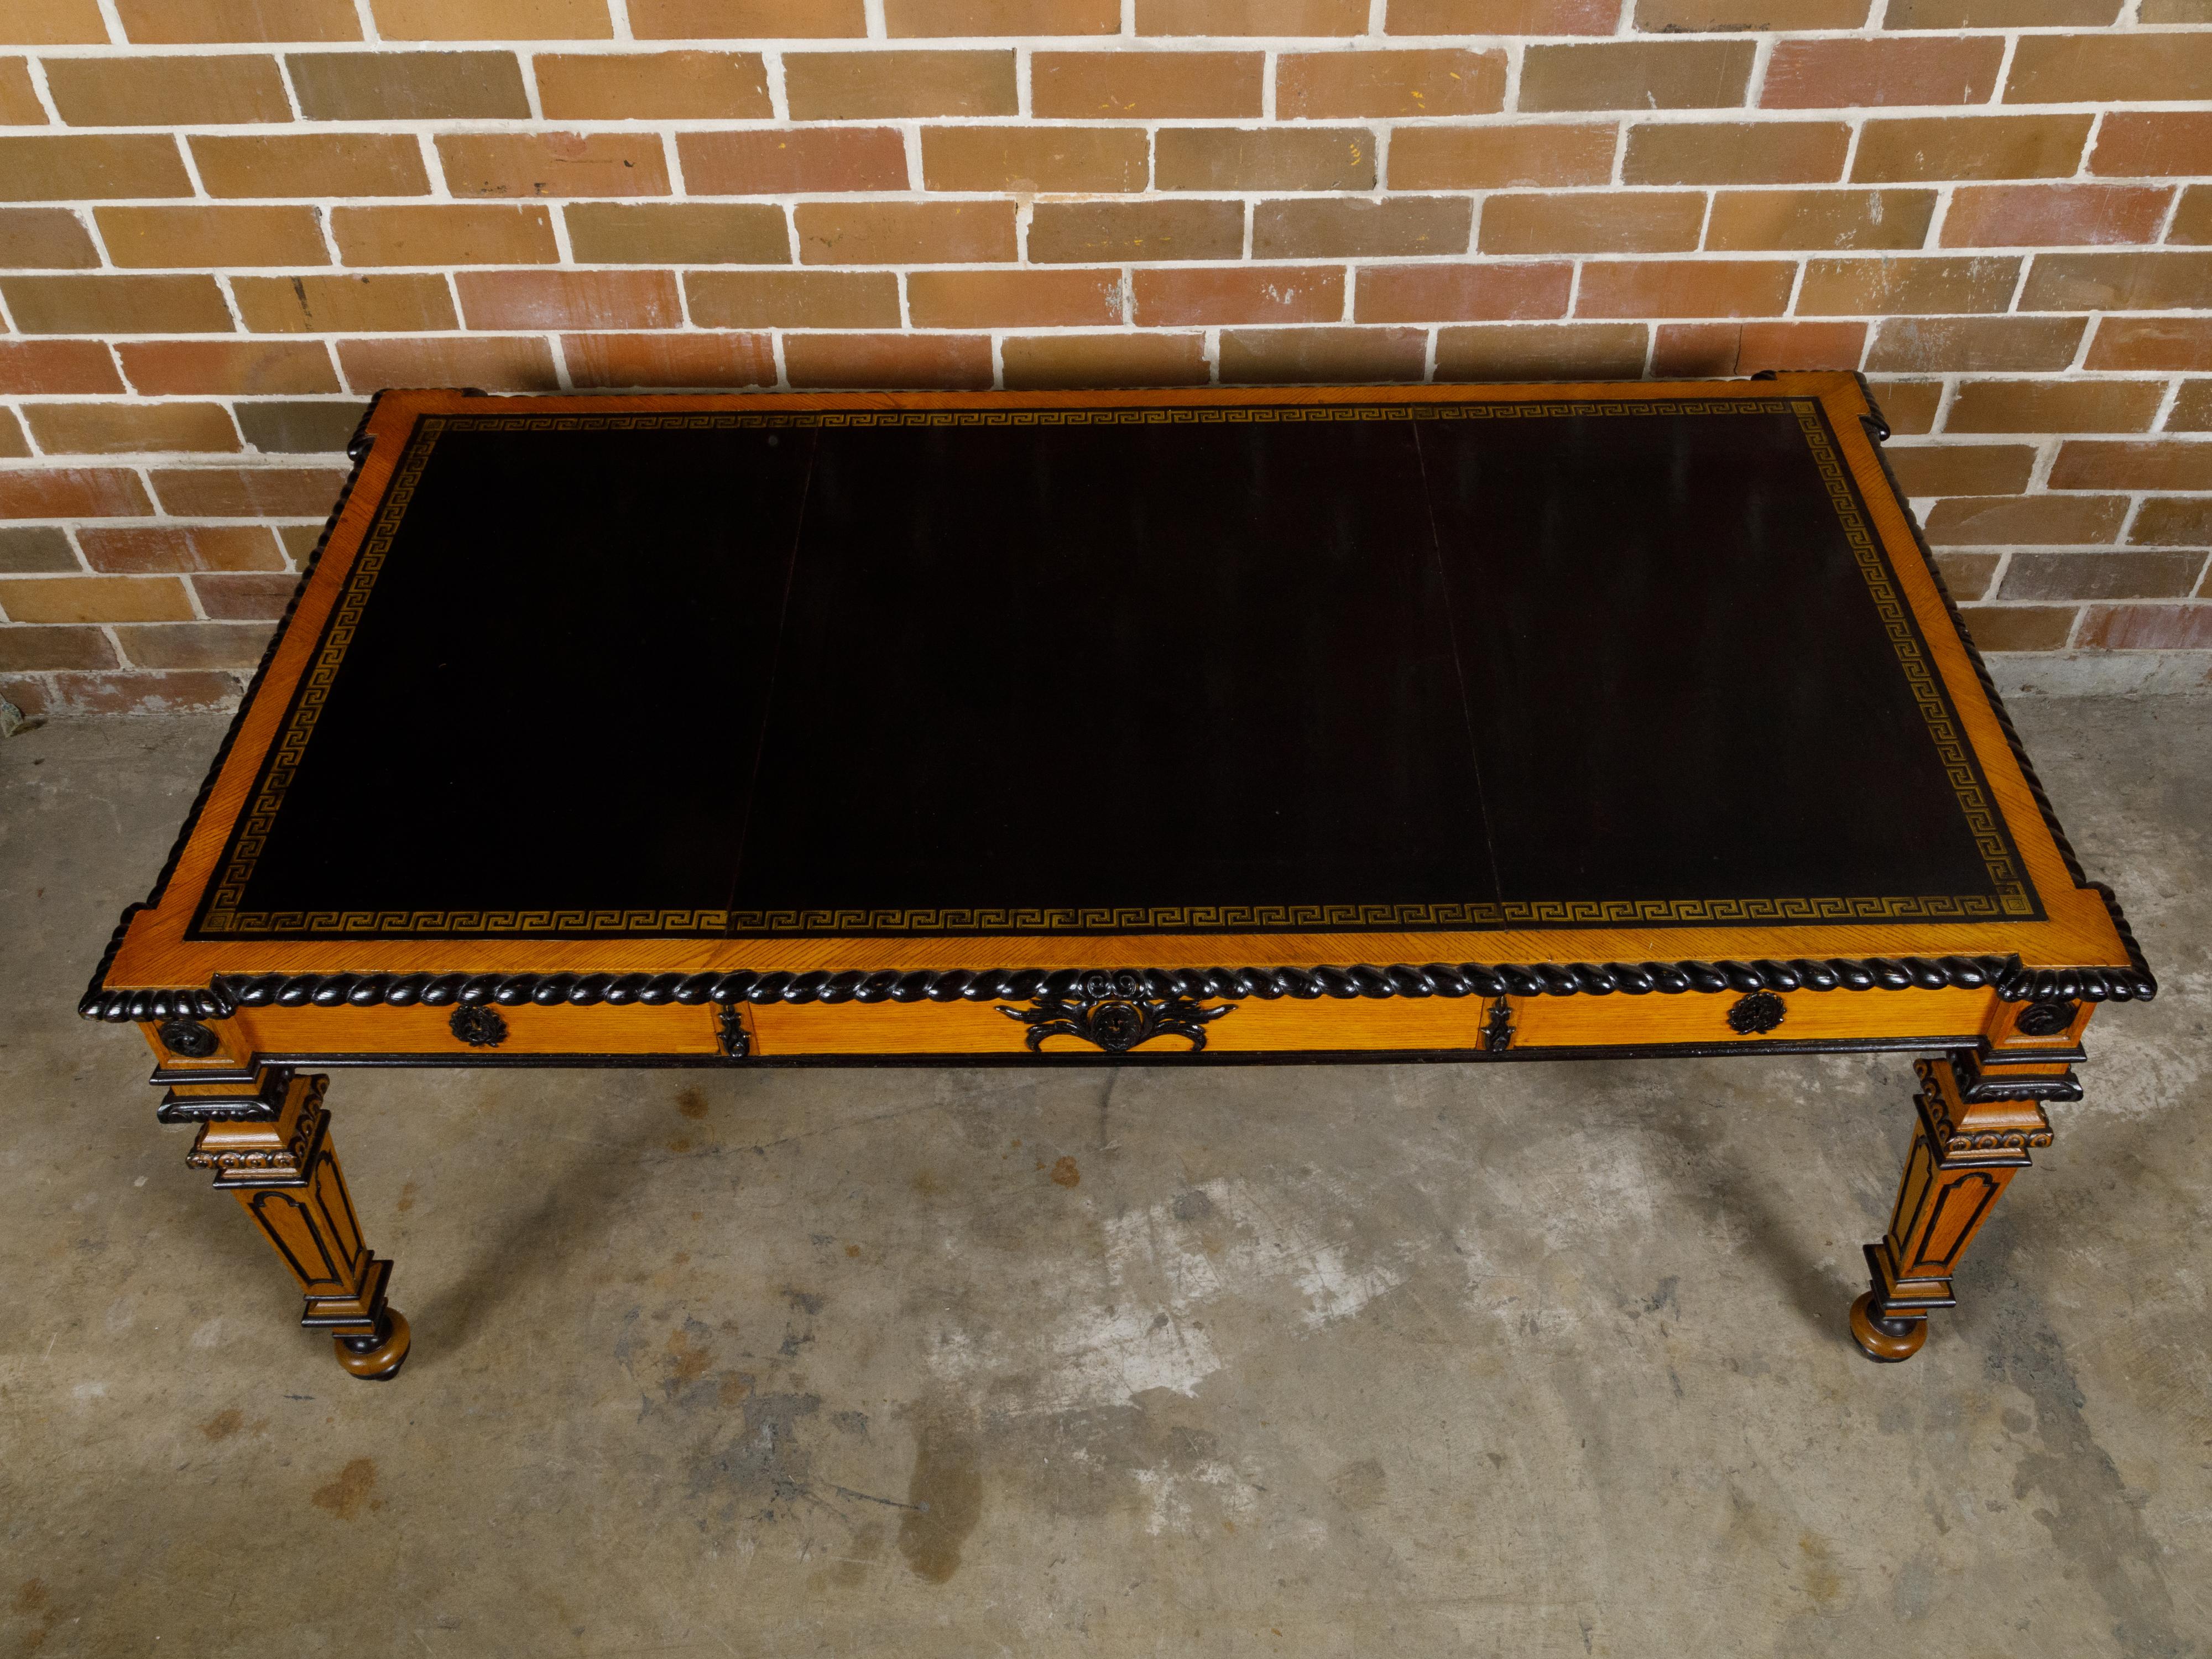 English 19th Century Oak Desk with Ebonized Accents and Gilded Greek Key Frieze For Sale 8